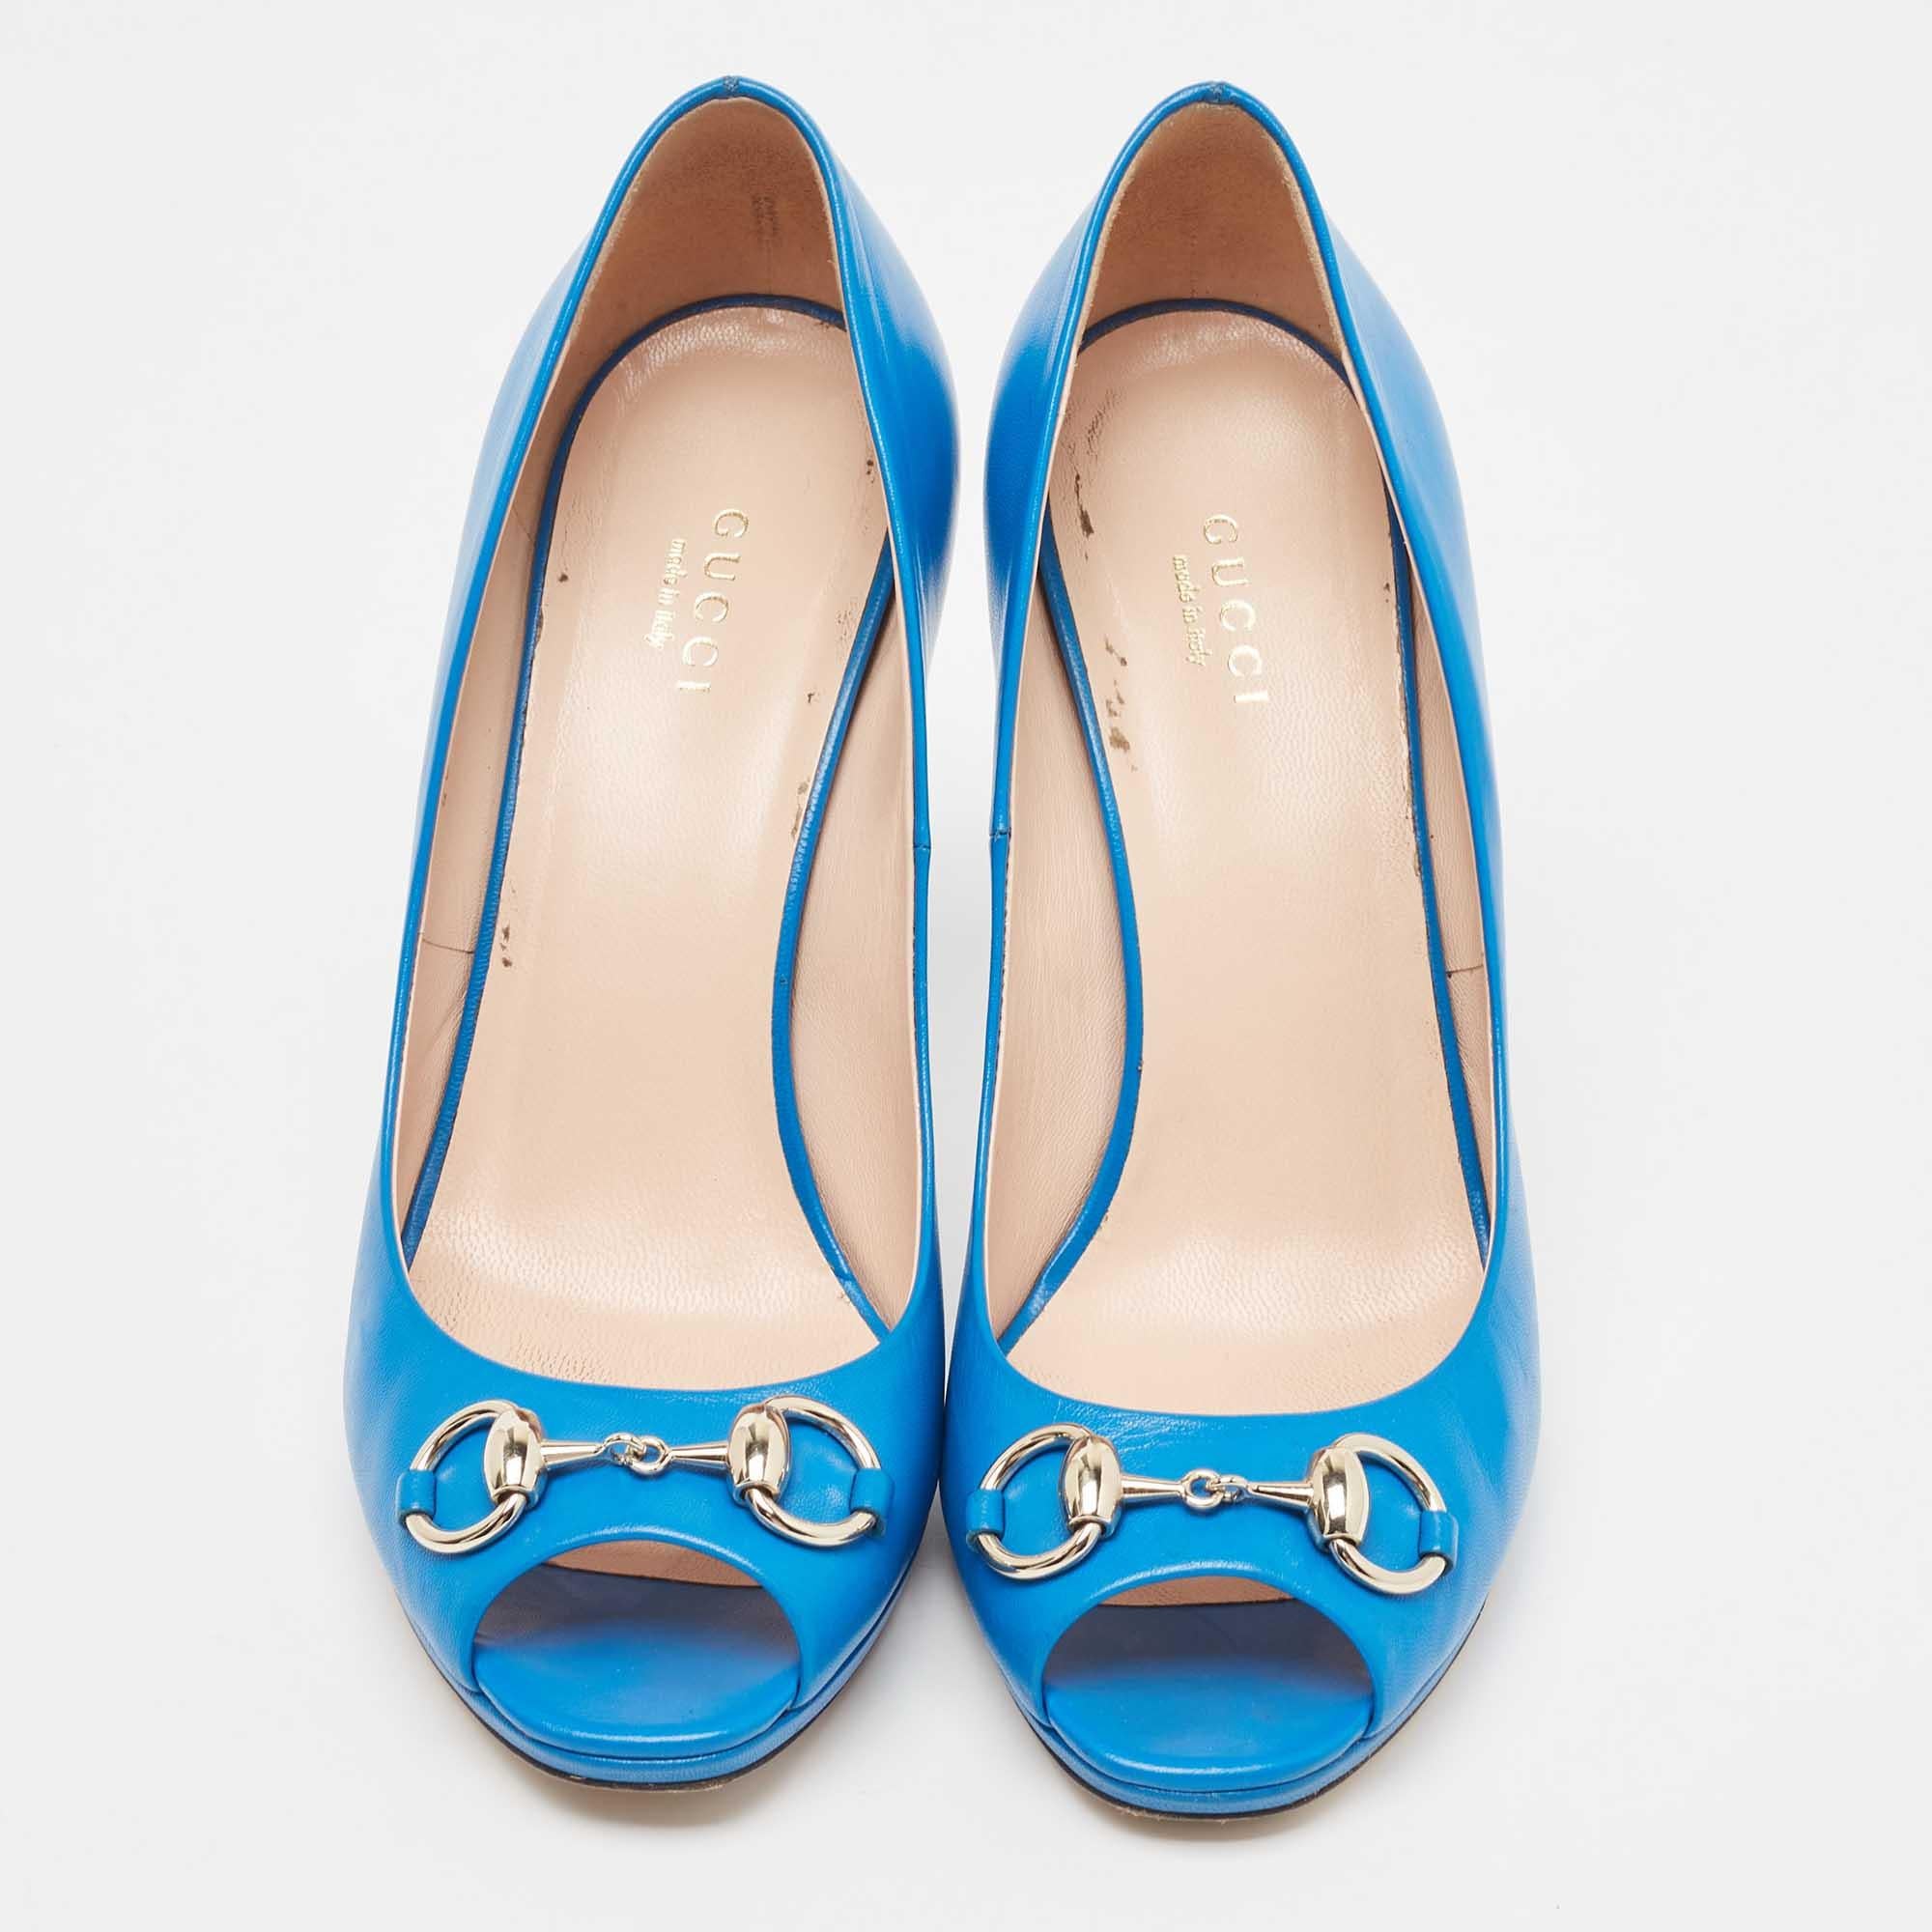 The fashion house’s tradition of excellence, coupled with modern design sensibilities, works to make these Gucci blue pumps a fabulous choice. They'll help you deliver a chic look with ease.

